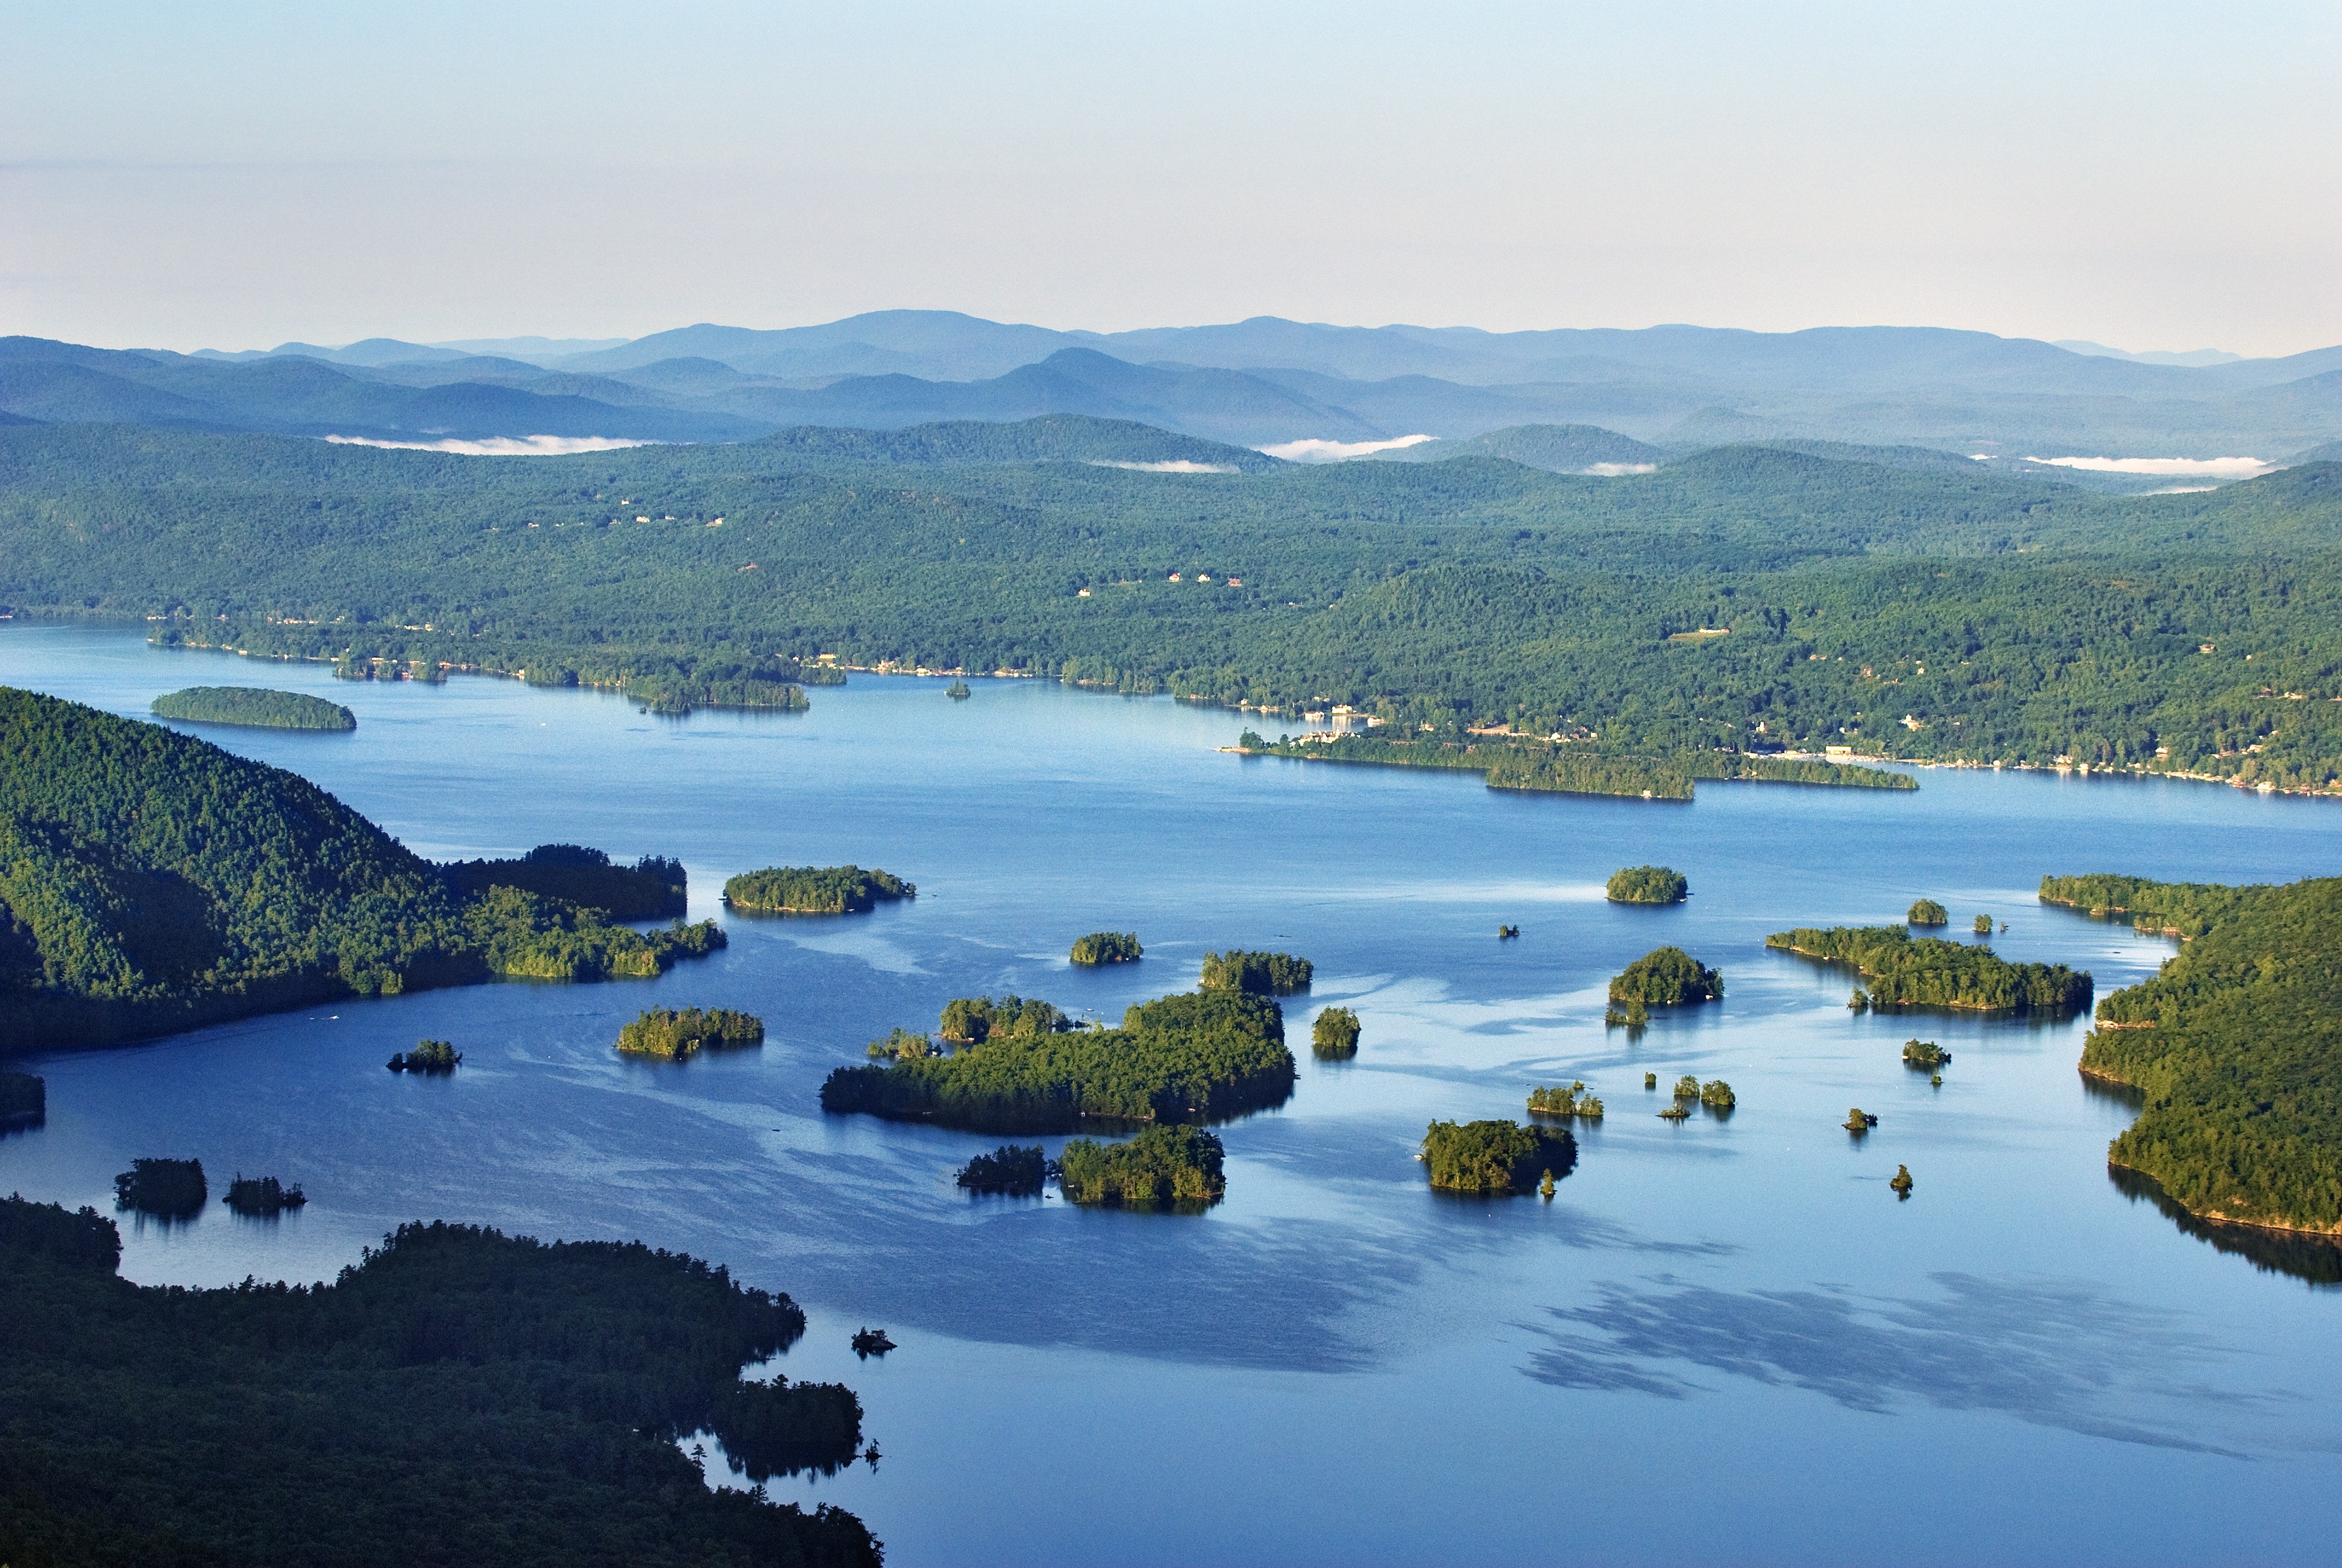 Aerial view of Lake George. Islands in The Narrows, Bolton in the background. Photo by Carl Heilman, II/Wild Visions, Inc.